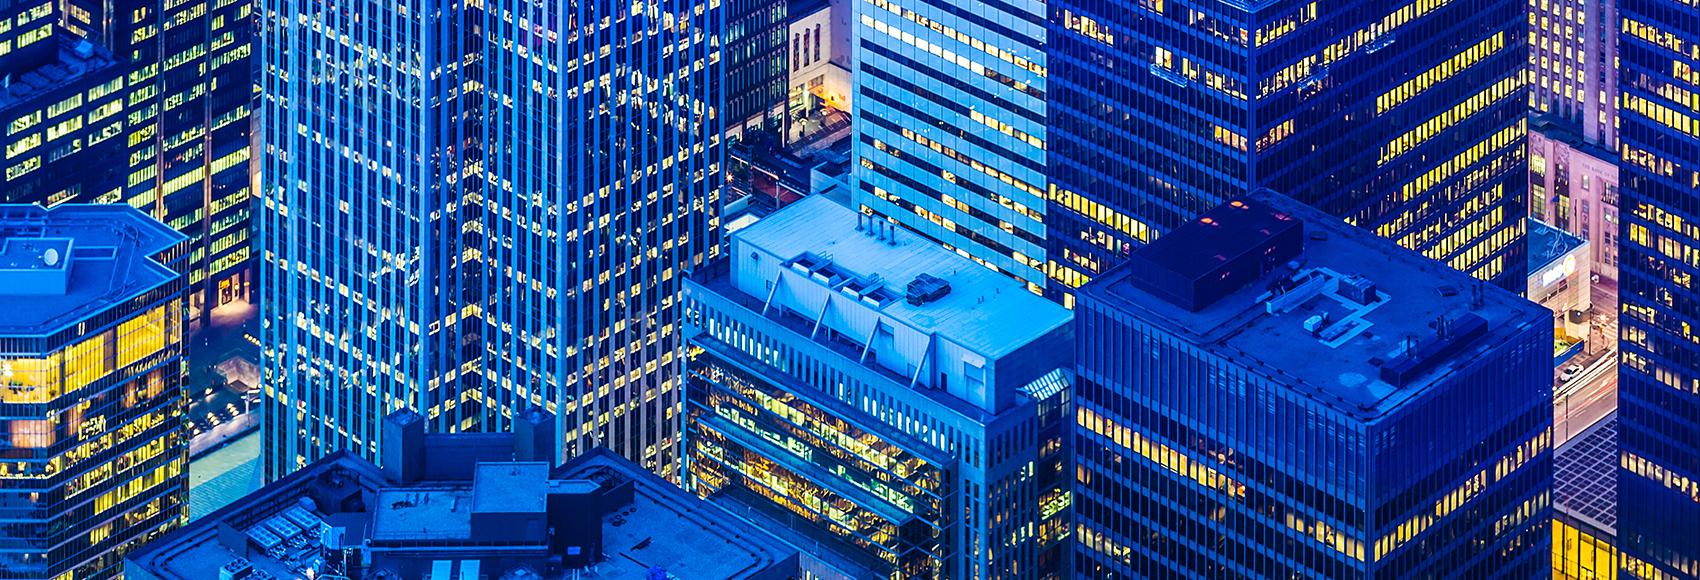 Toronto financial district cityscape at dusk